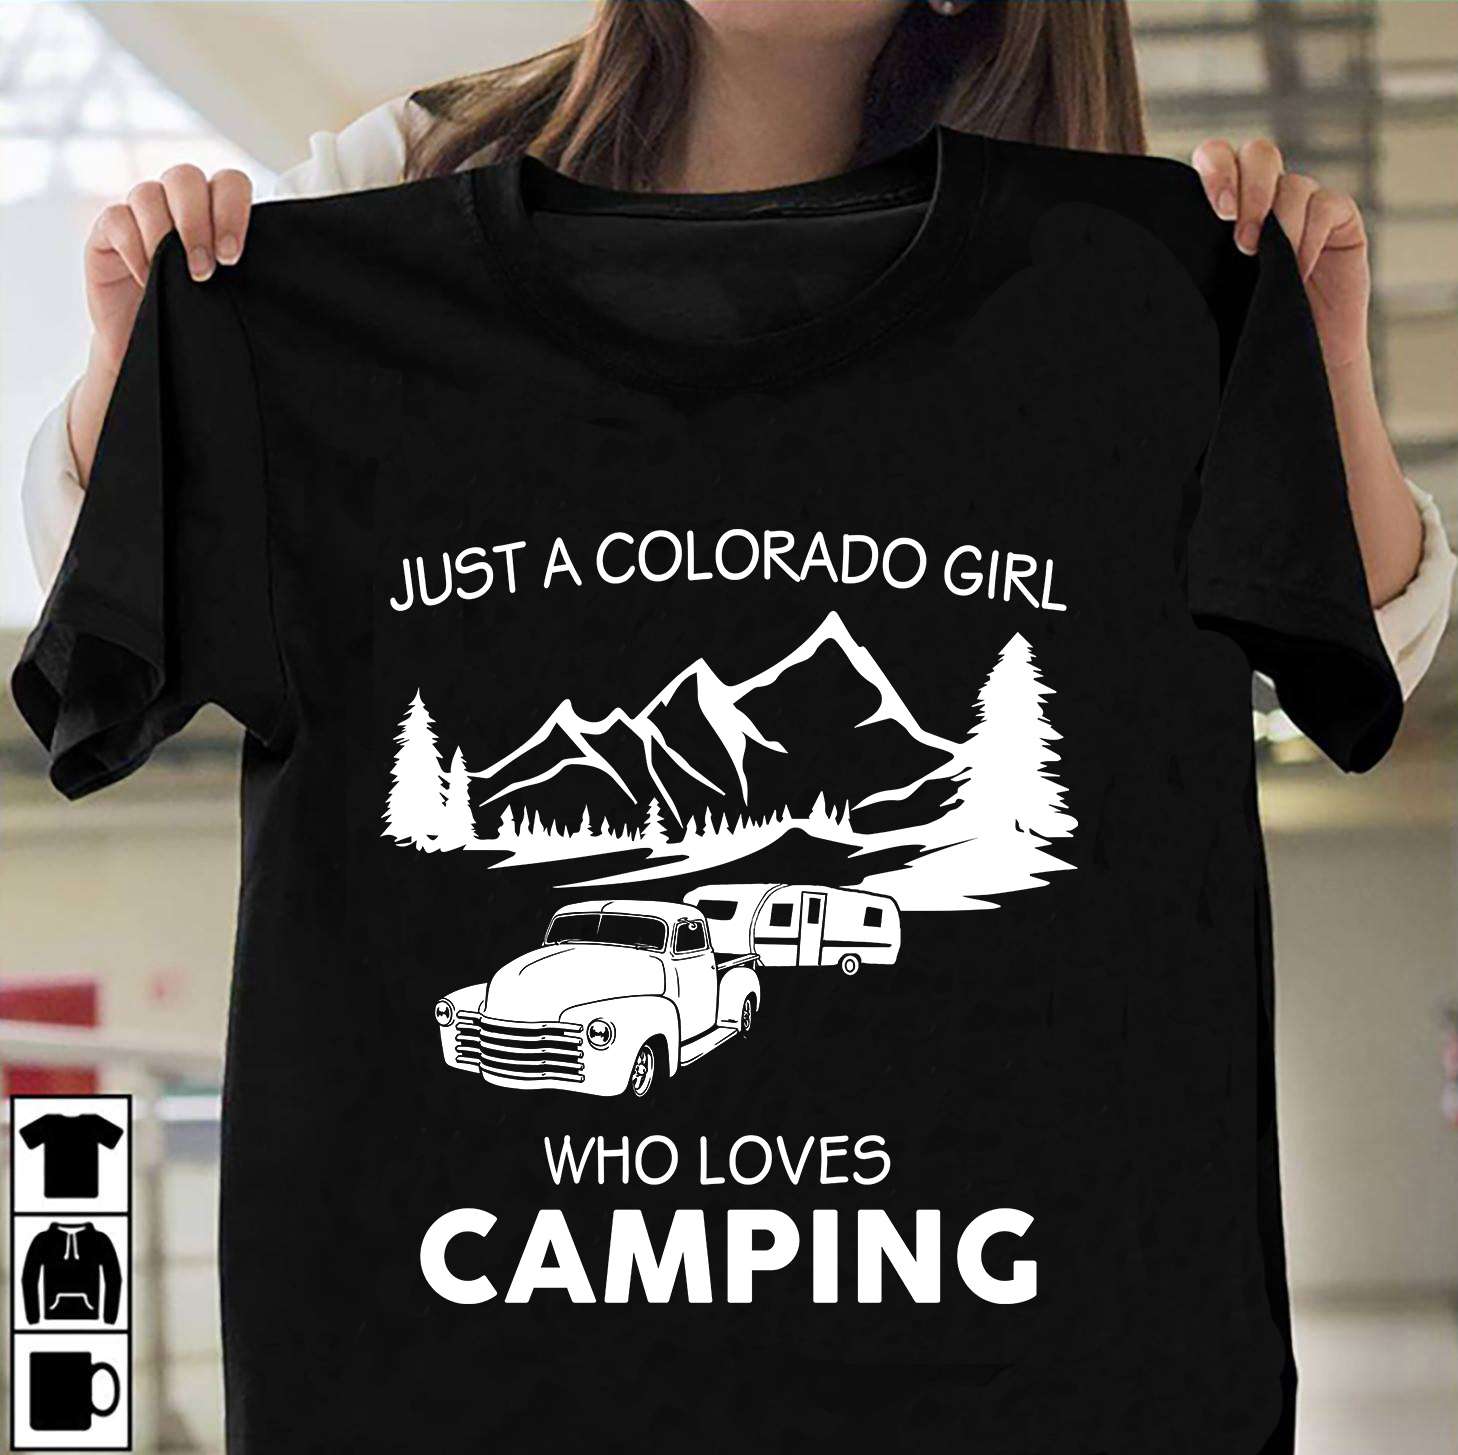 Camping On The Mountain, Camping Girl - Just a colorado girl who loves camping